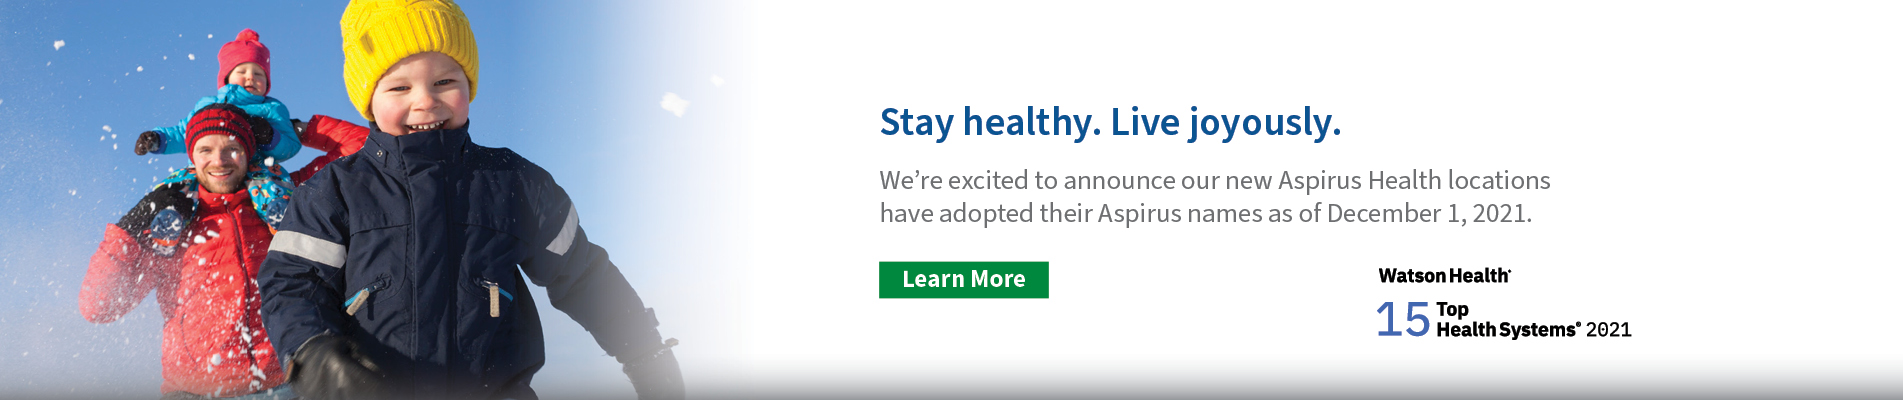 Stay healthy. Live Joyously. Aspirus Health locations have adopted their Aspirus names as of December 1, 2021. 